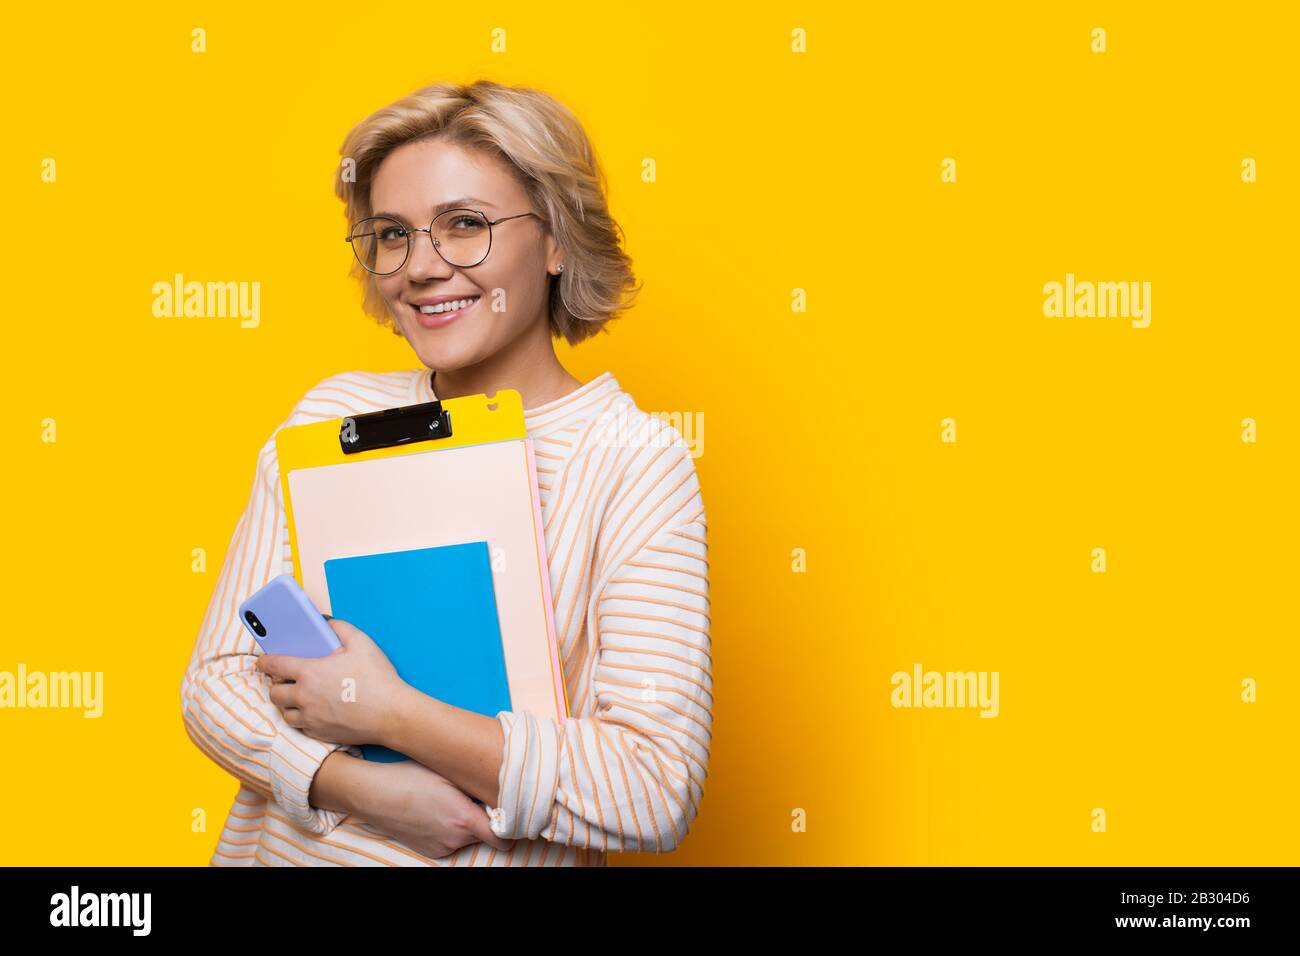 Stunning blonde teacher looking through eyeglasses while holding some books and posing on a yellow wall with freespace Stock Photo